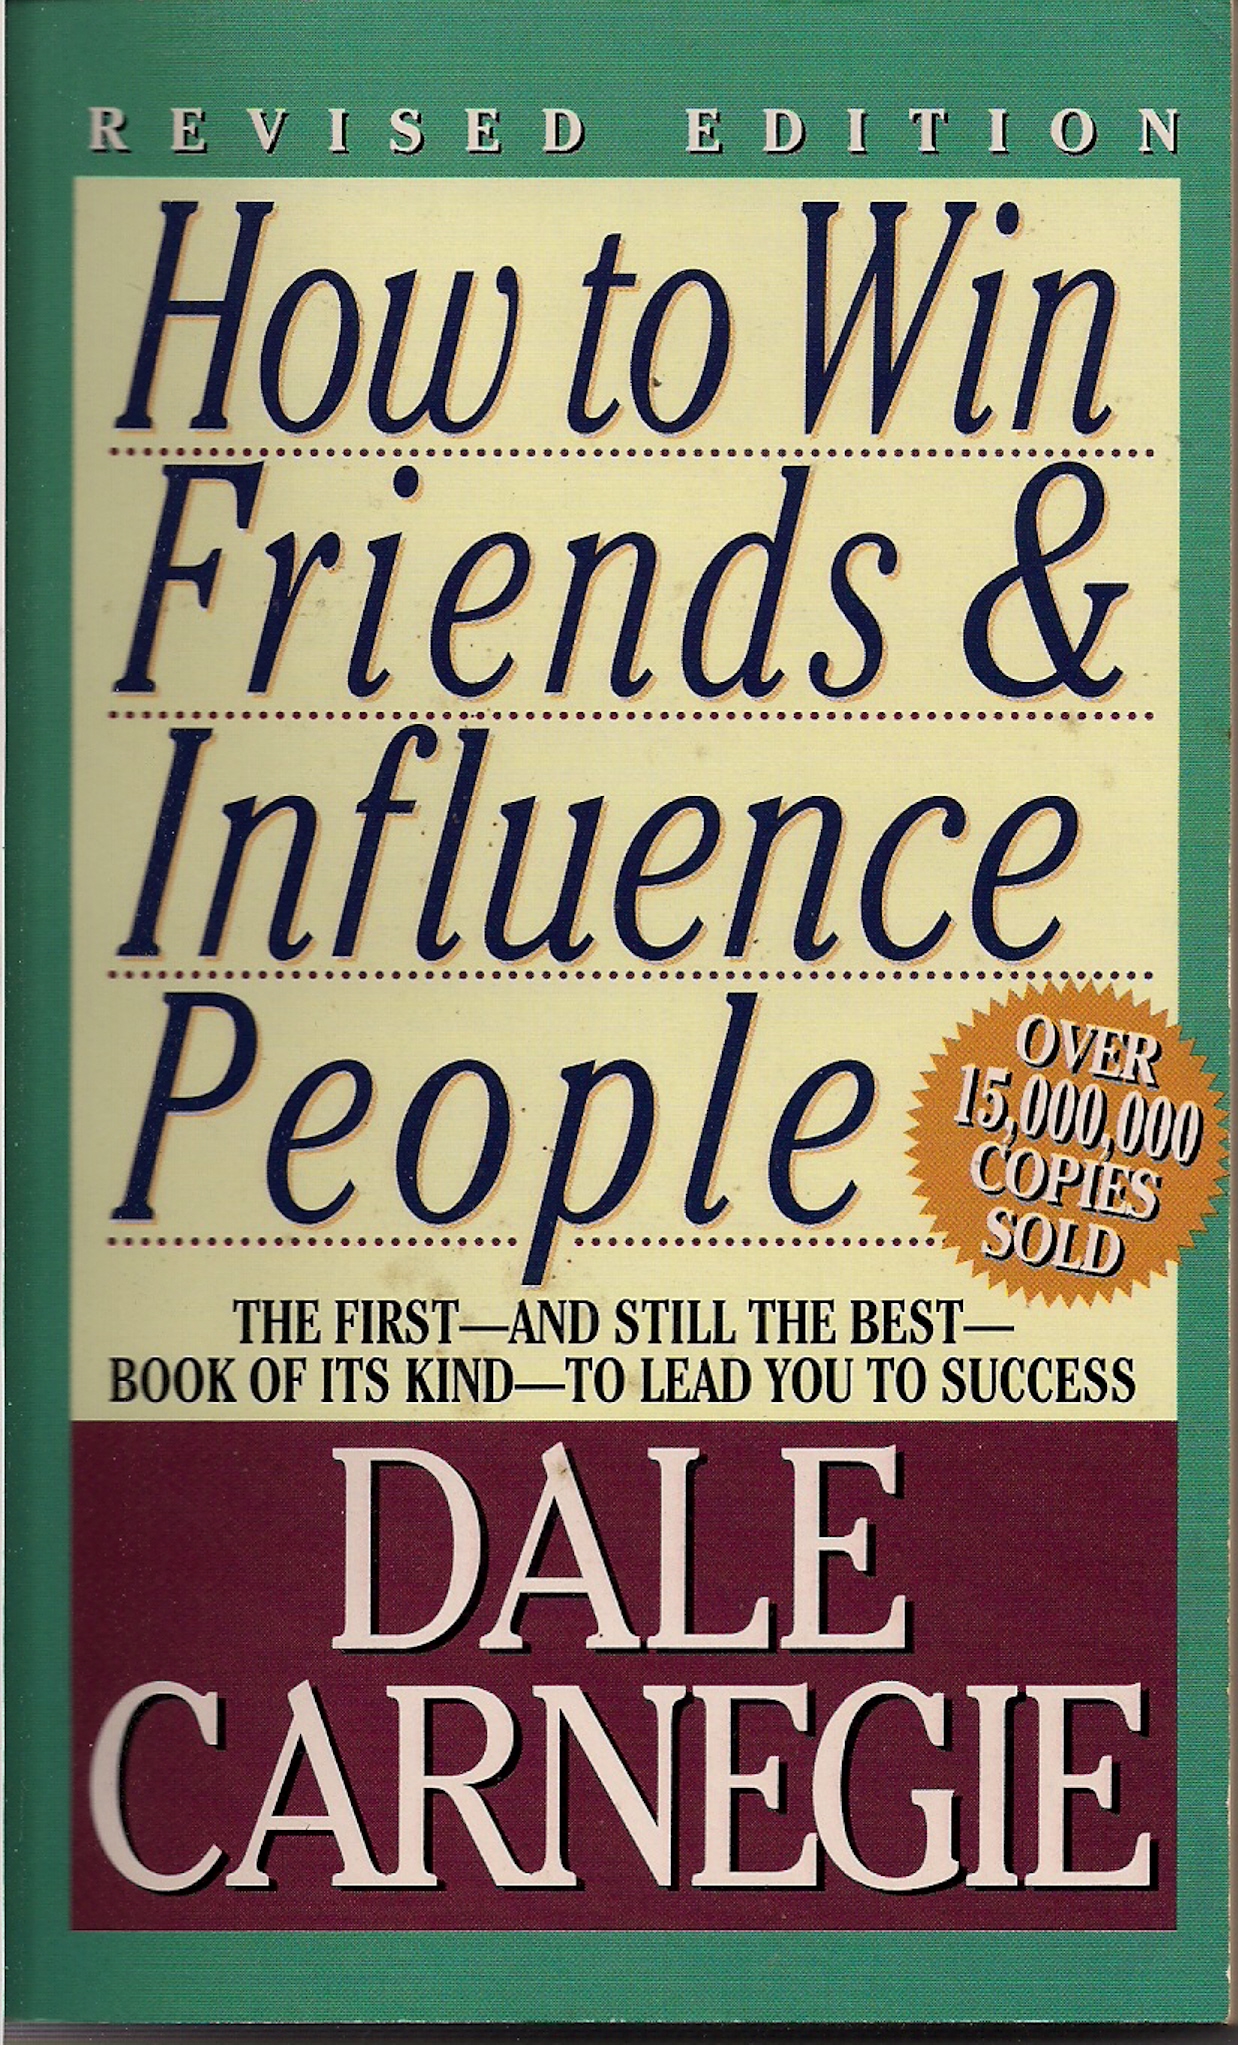 Workbook and Summary for How to Win Friends and Influence People